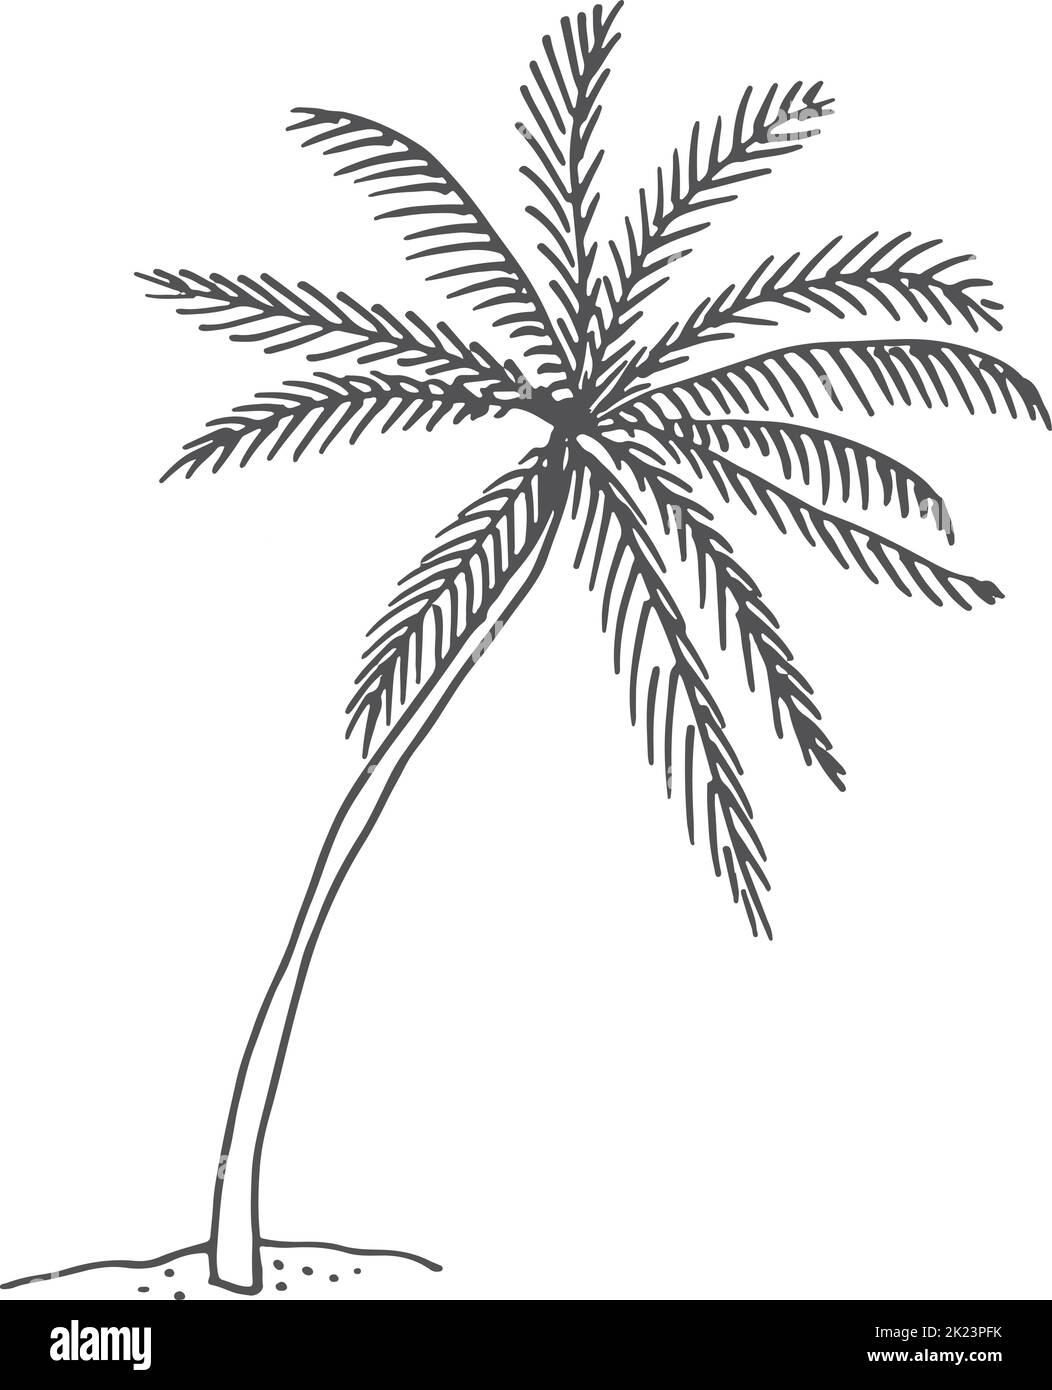 Palm sketch. Growing tropical tree in hand drawn style Stock Vector